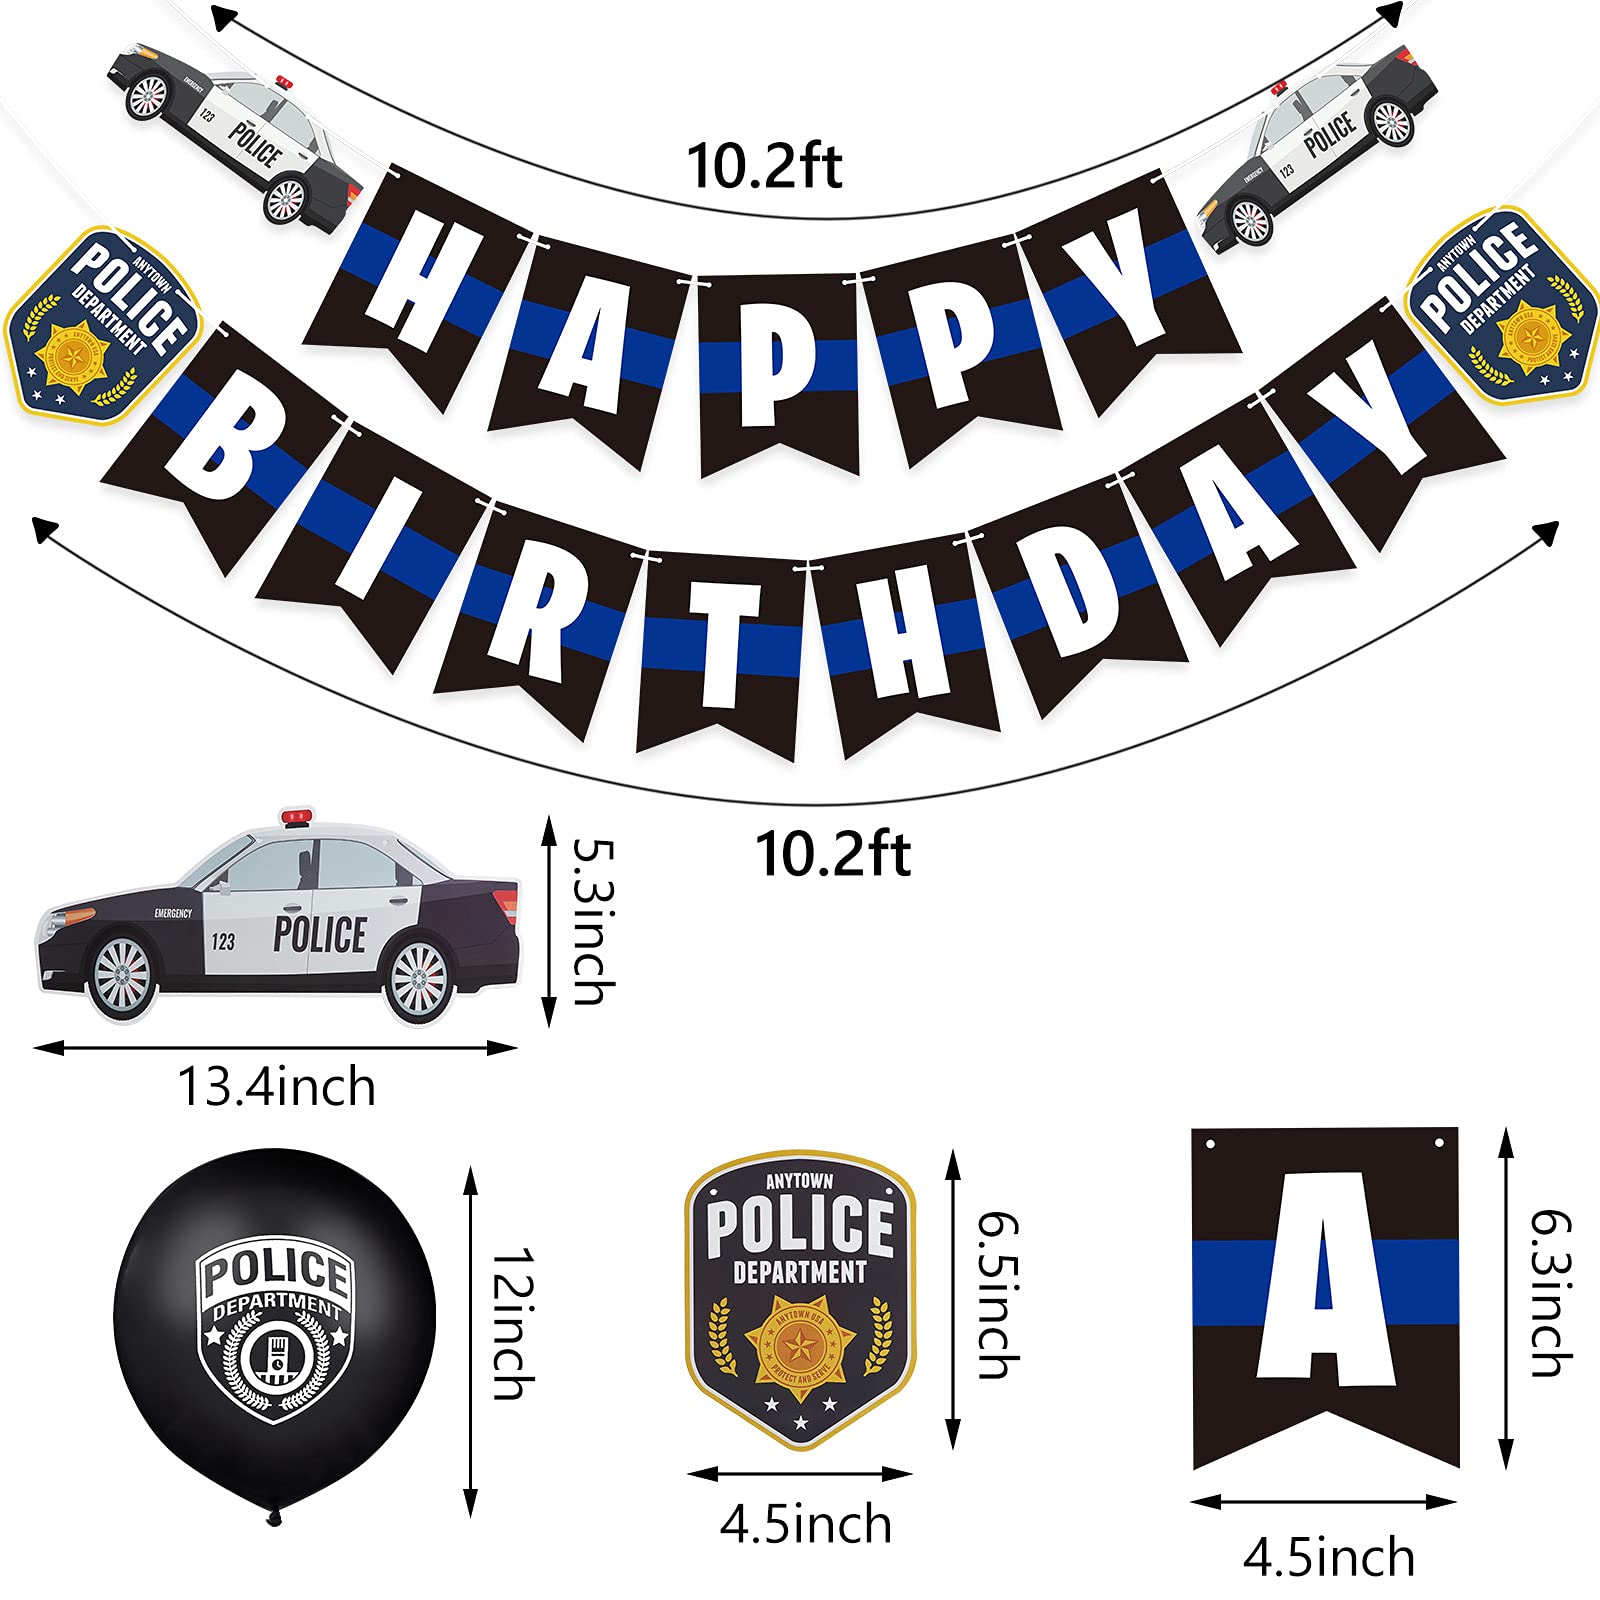 32 Pieces Police Birthday Party Decorations Set Police Party Swirls Set Including 20 Police Party Latex Balloons 2 Police Banners 10 Police Hanging Swirls for Police Themed Birthday Party